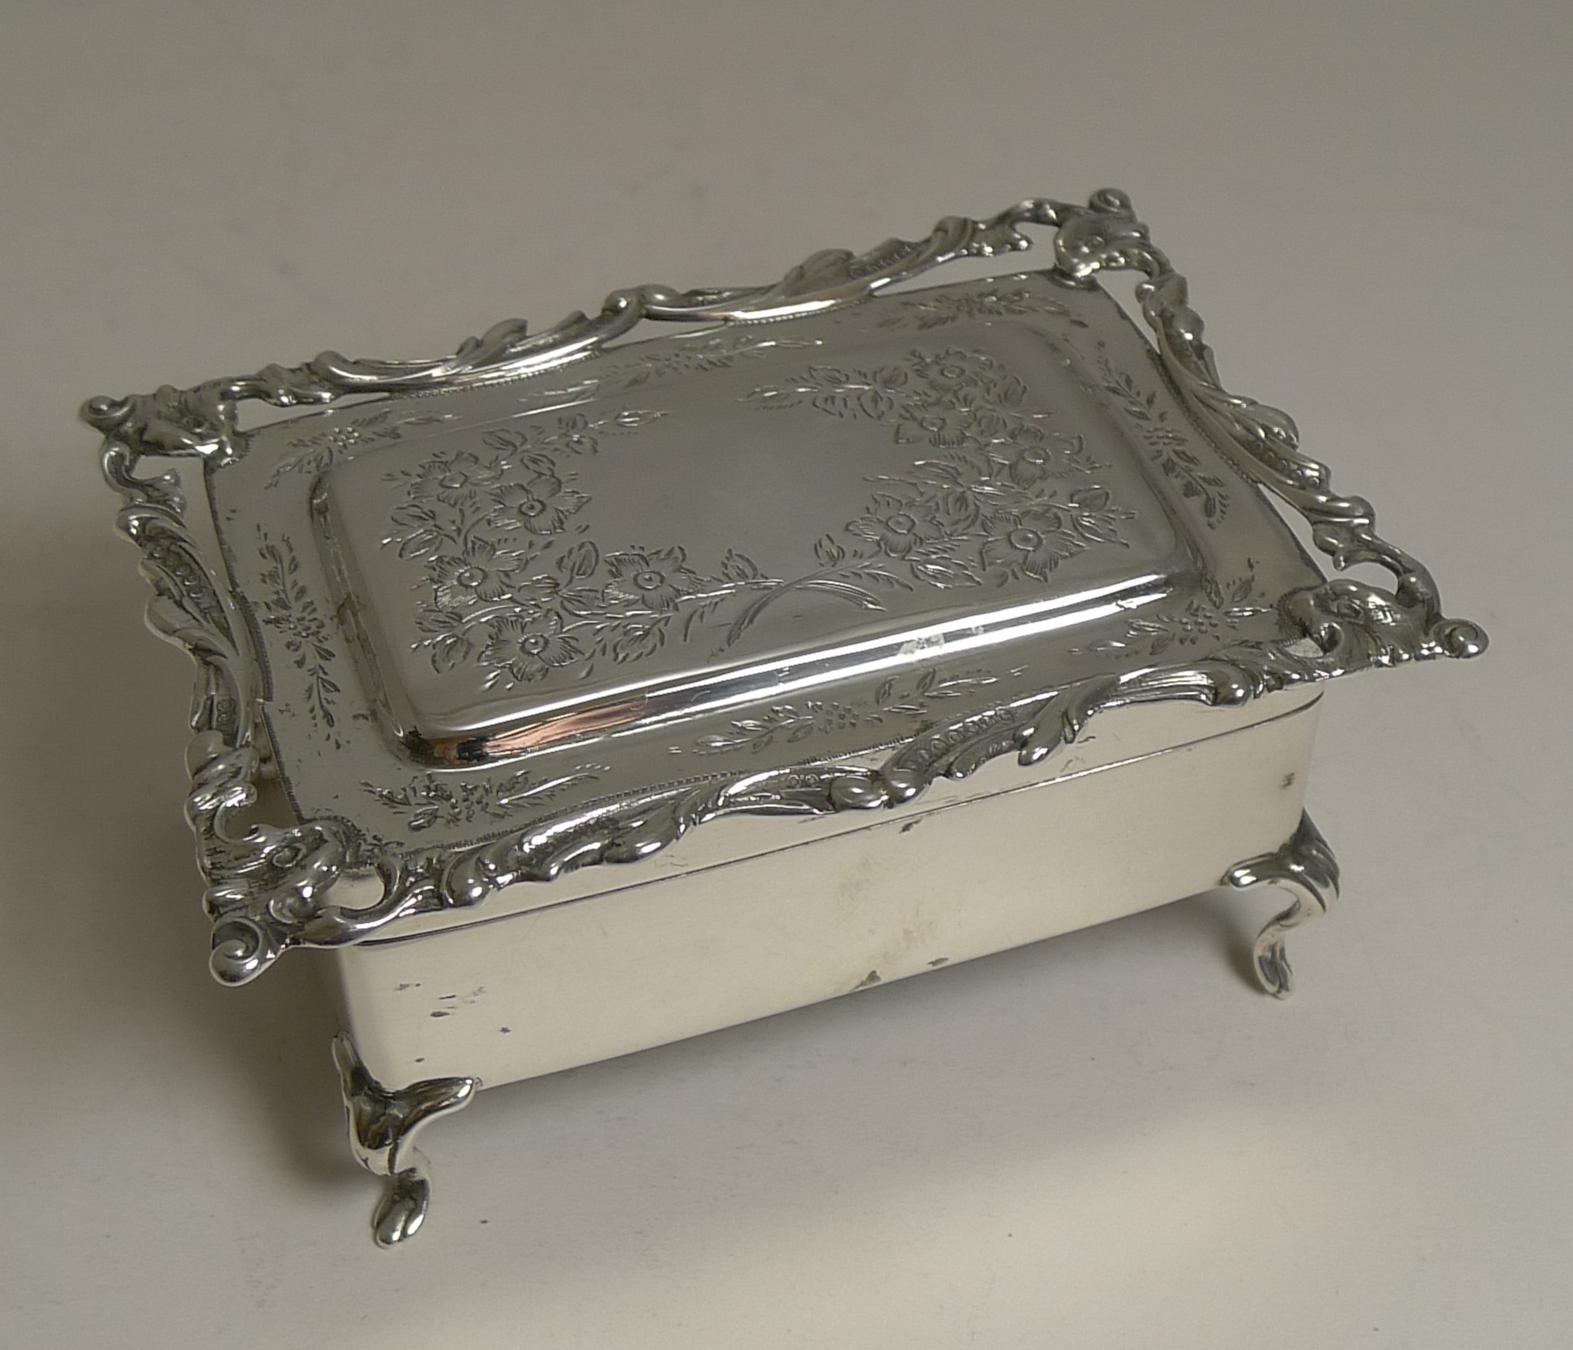 Edwardian Antique English Sterling Silver Jewelry / Ring Box, 1906